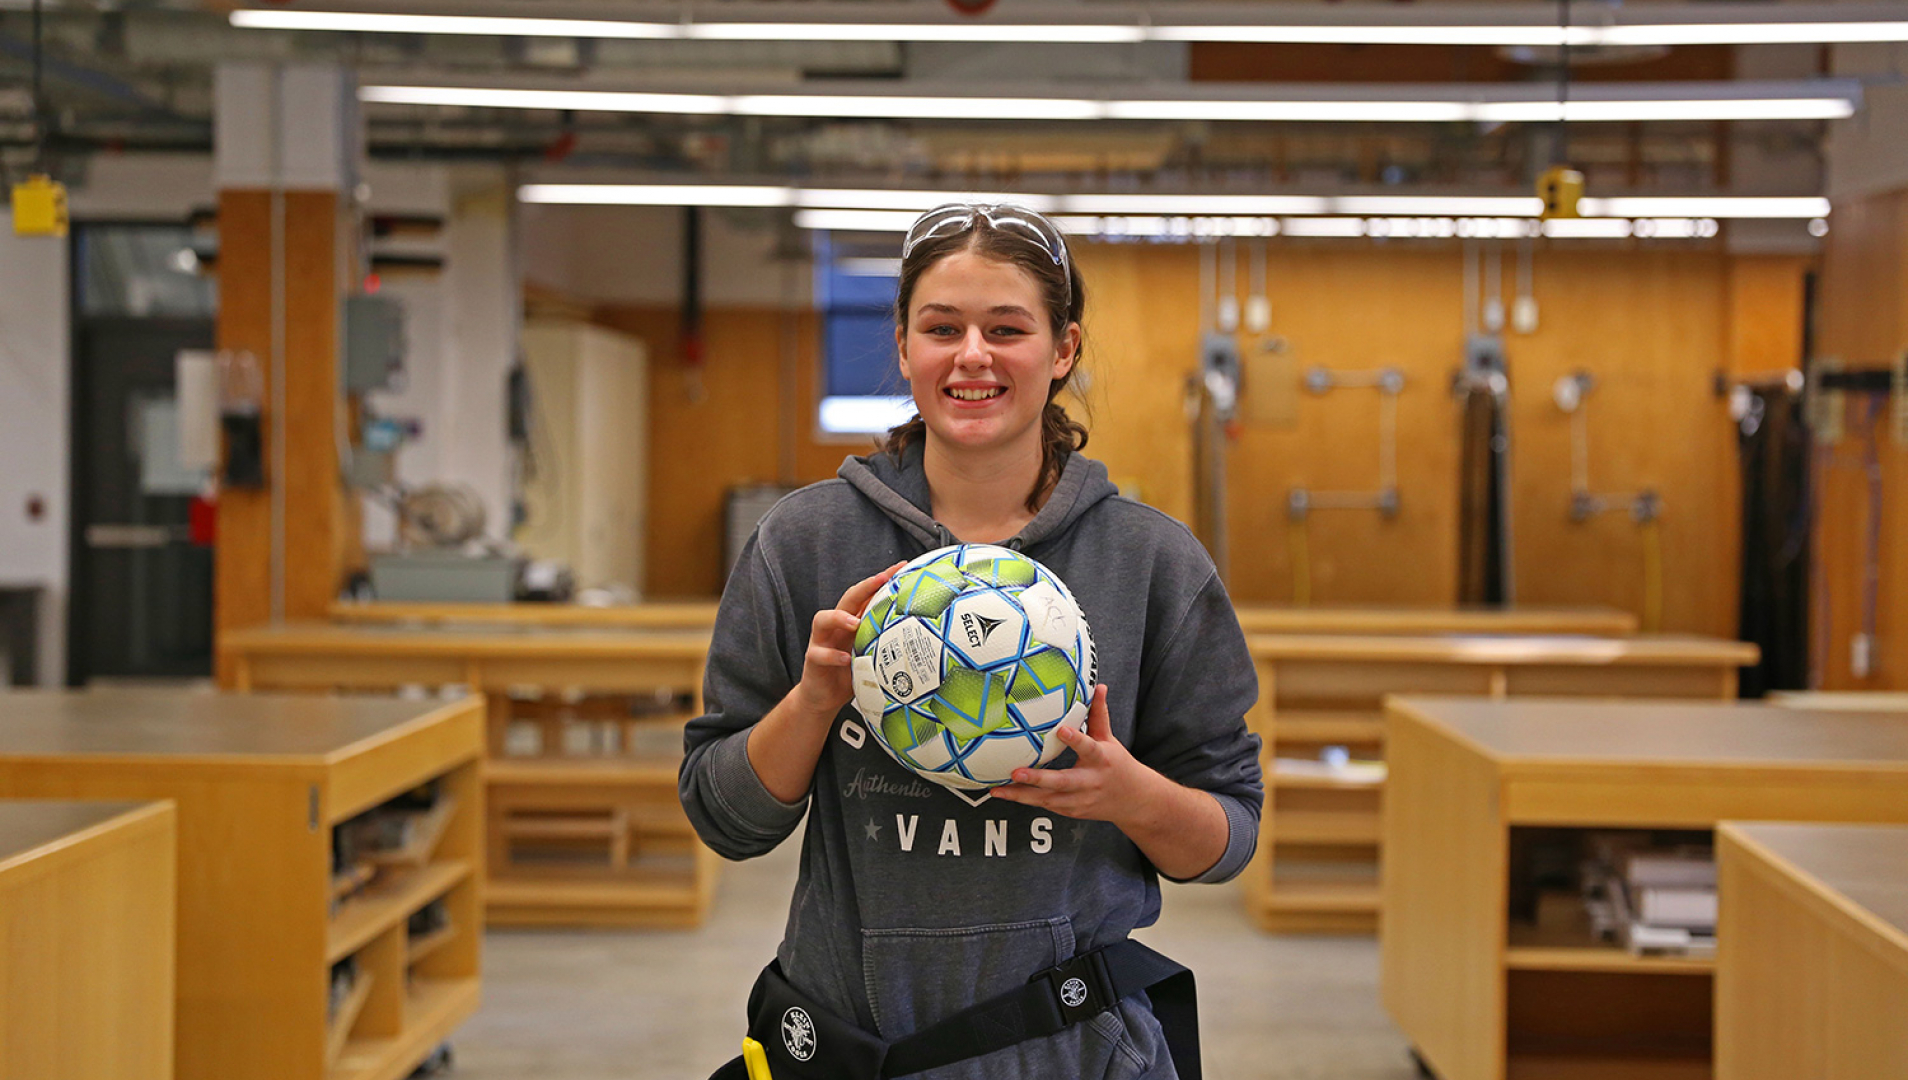 Hailey Burghart, who is studying to become an electrician, plays on the women’s soccer team.